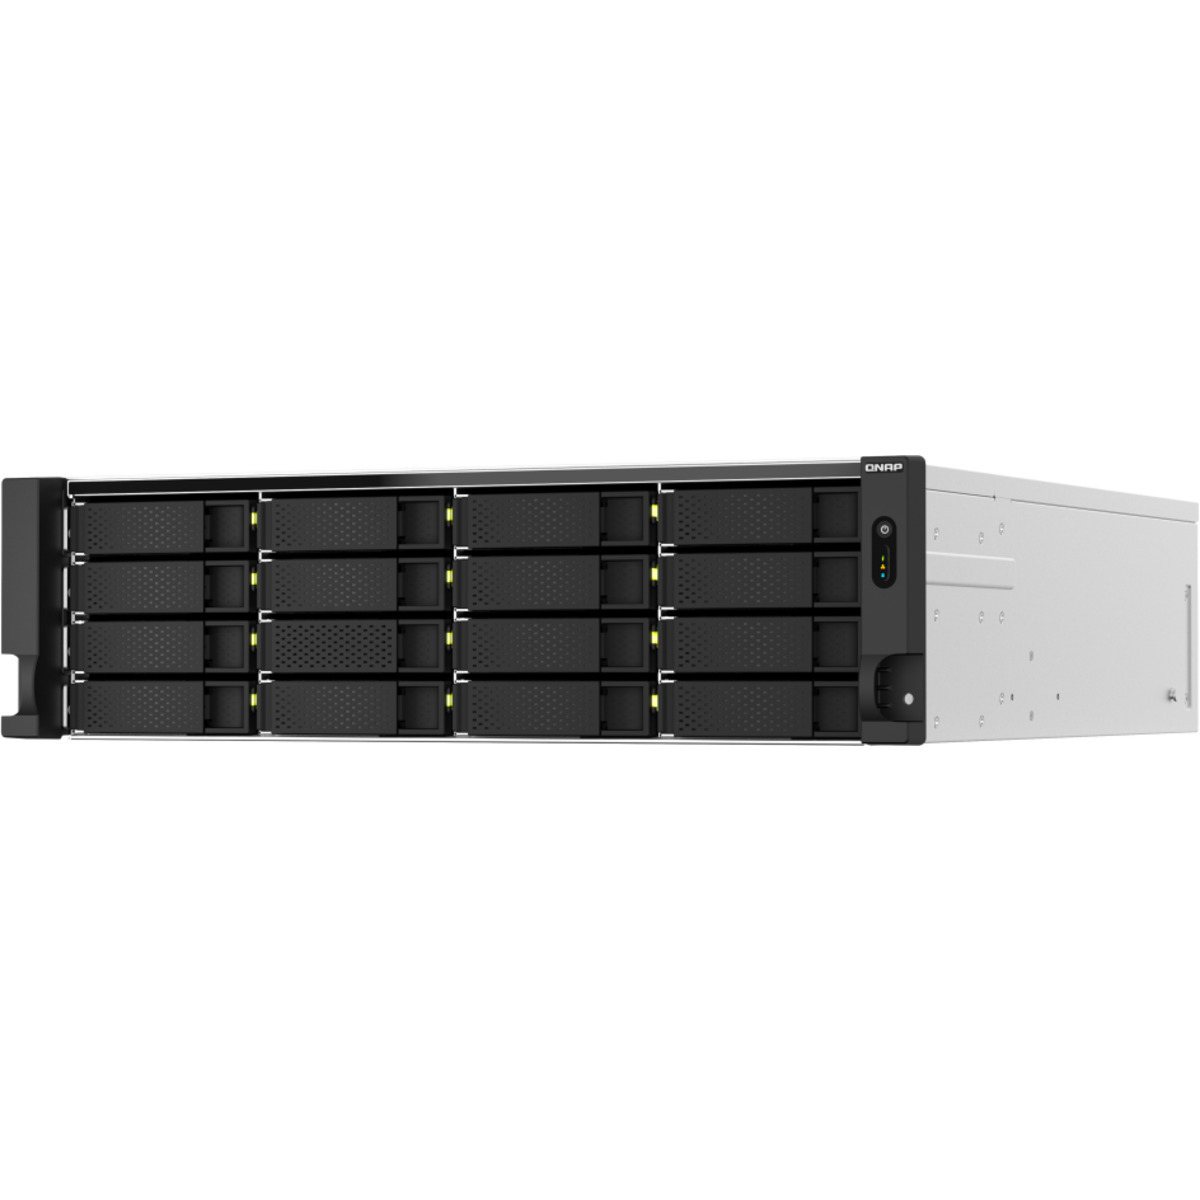 QNAP TS-h2287XU-RP E-2378 QuTS hero Edition 160tb 16+6-Bay RackMount Large Business / Enterprise NAS - Network Attached Storage Device 16x10tb Seagate IronWolf ST10000VN000 3.5 7200rpm SATA 6Gb/s HDD NAS Class Drives Installed - Burn-In Tested TS-h2287XU-RP E-2378 QuTS hero Edition